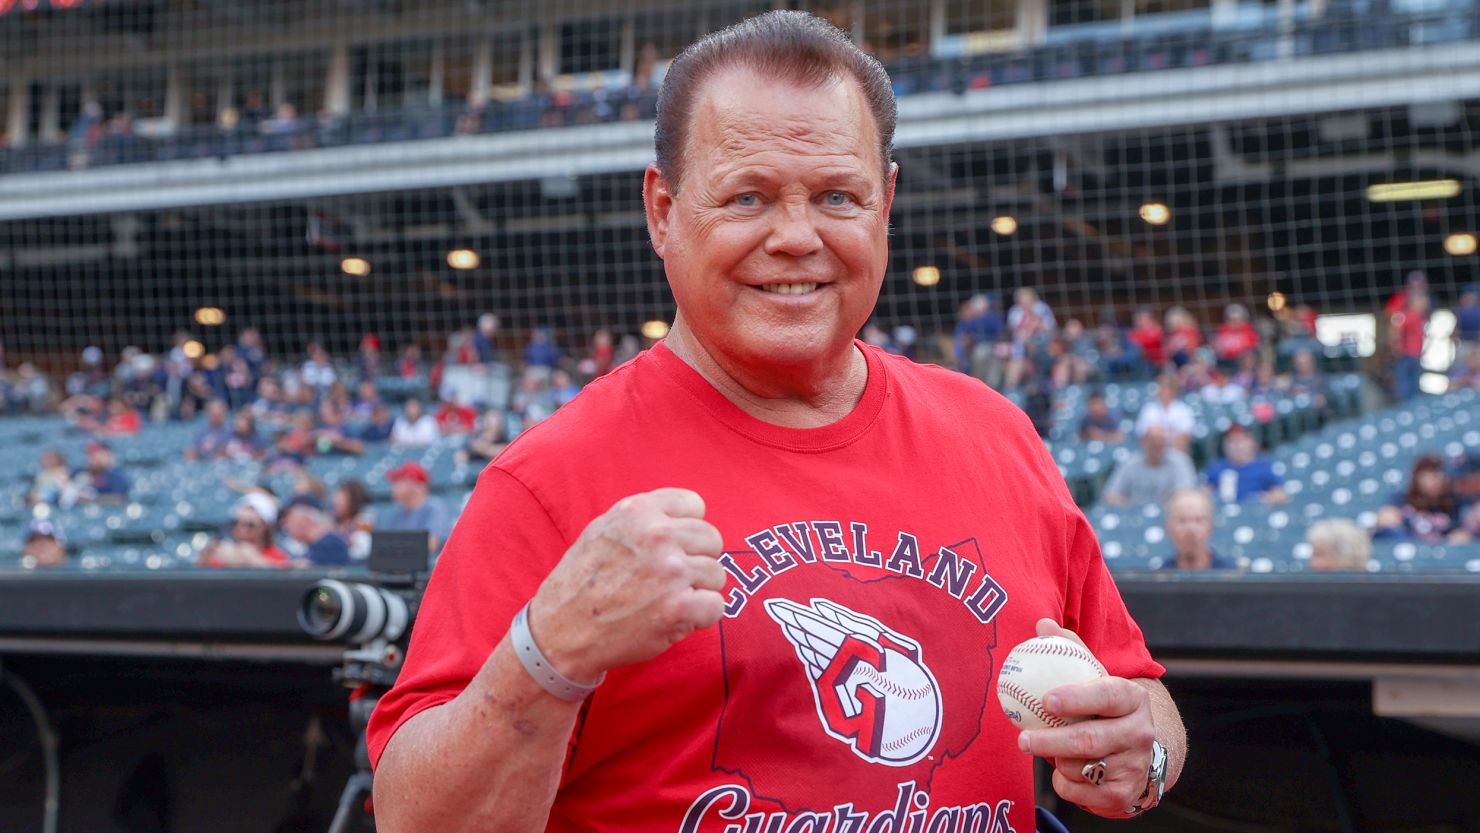 WWE announcer Jerry Lawler is seen on the field prior to a Major League Baseball game between the Minnesota Twins and host Cleveland Guardians on September 16.